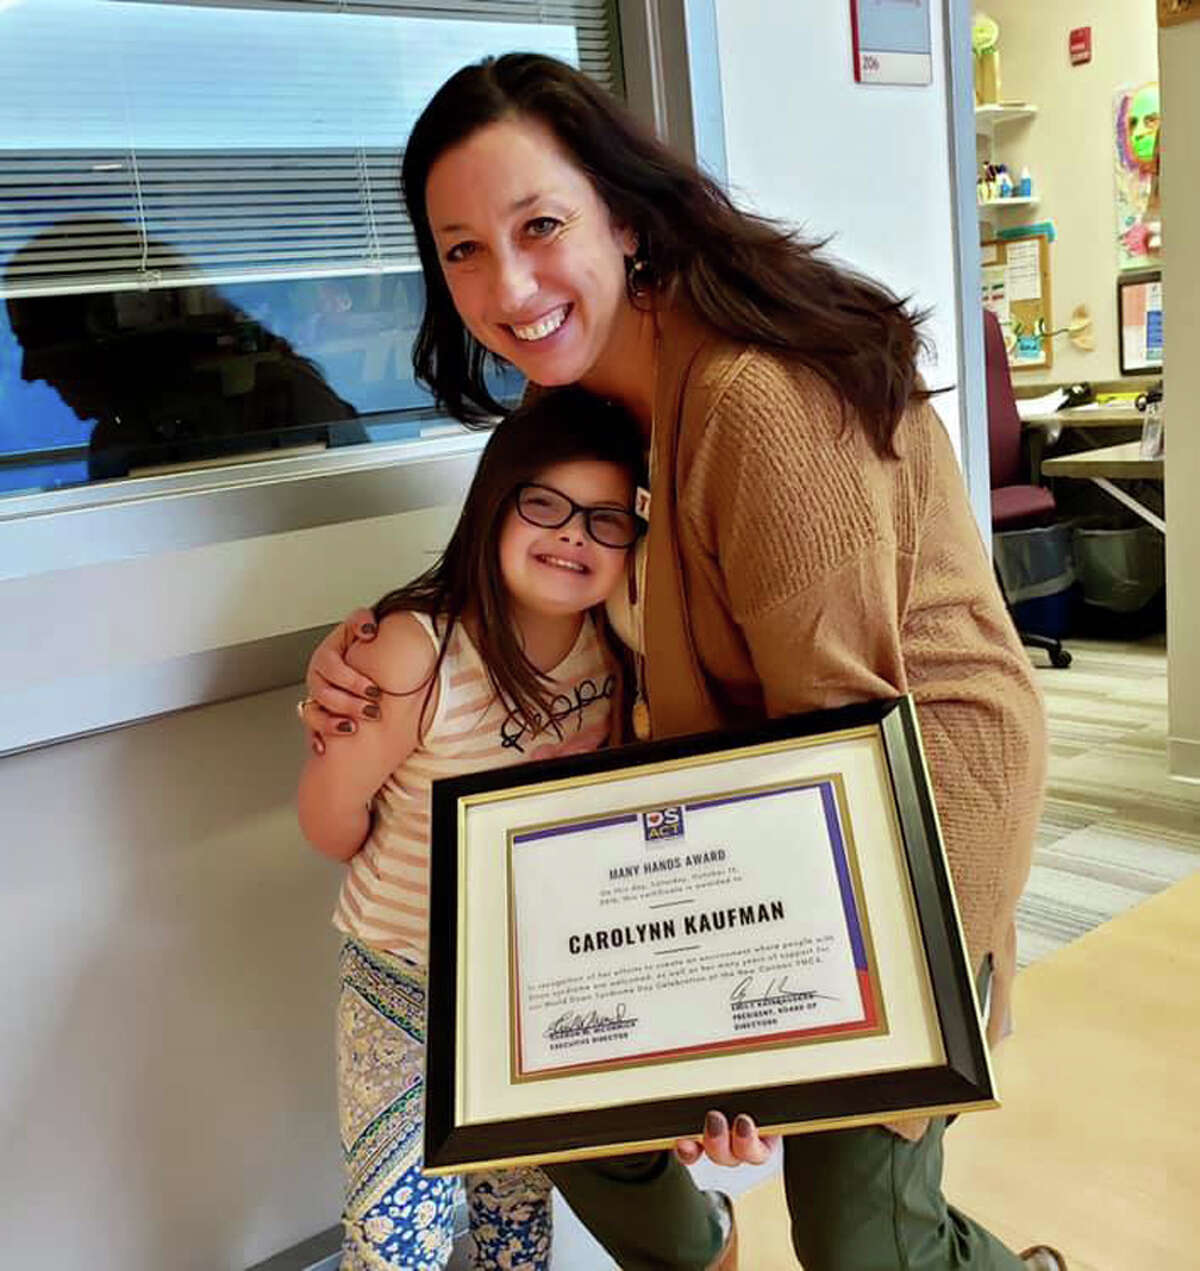 Carolynn Kaufman, New Canaan YMCA Director of Special Needs Programming, shown with Amber Lehrman at New Canaan YMCA on Dec. 8, received the Many Hands Award in the Constant Contributor category from the Down Syndrome Association of Connecticut.